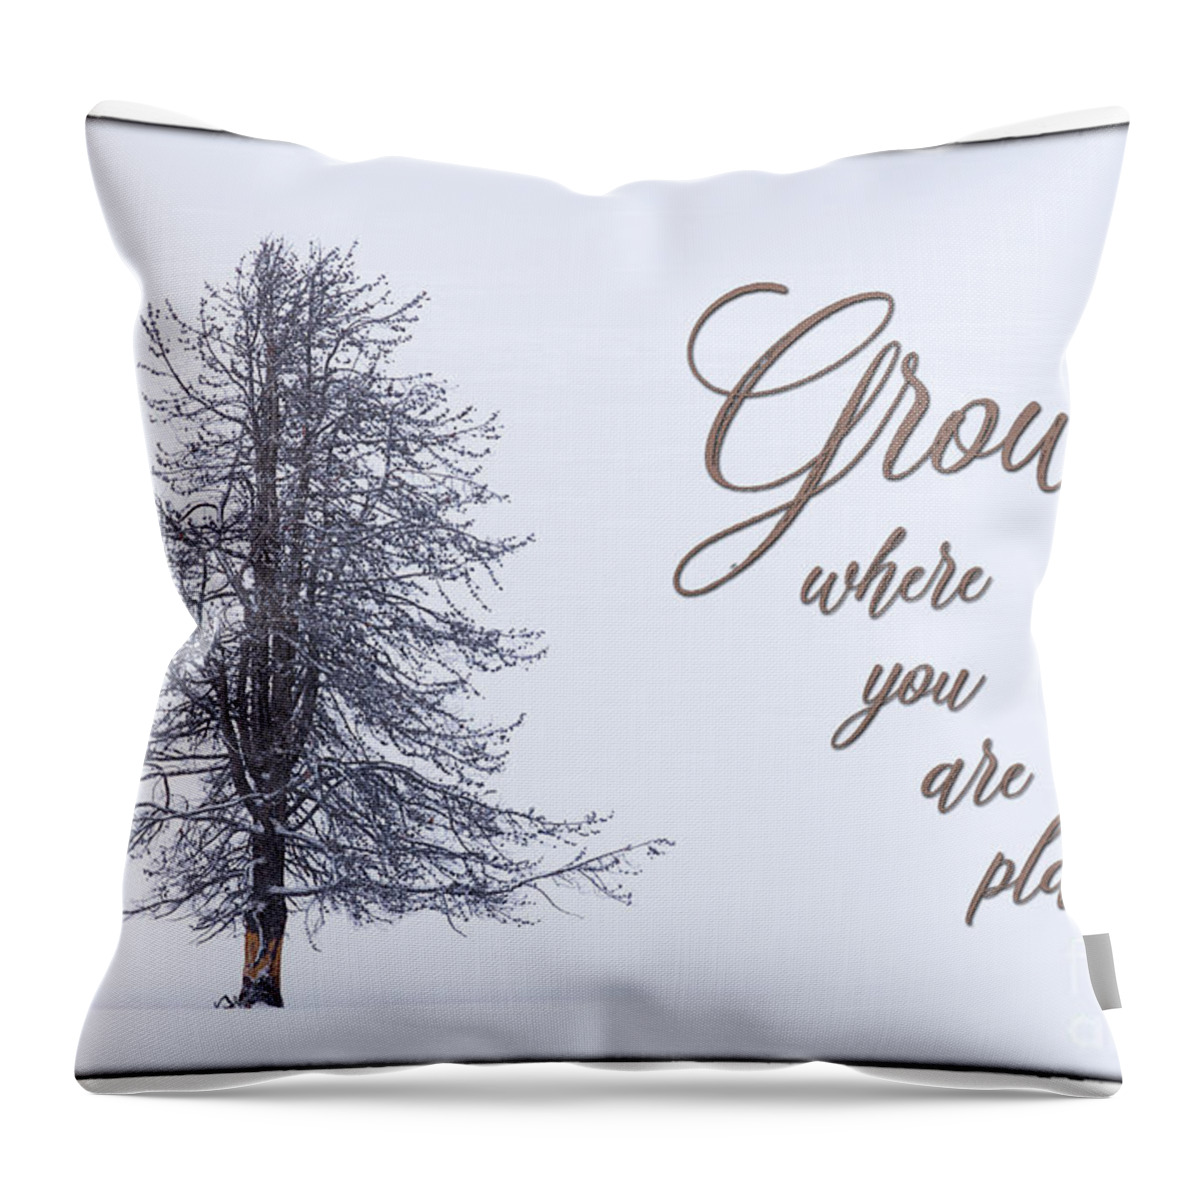 Grow Where You Are Planted Throw Pillow featuring the photograph Grow Where You Are Planted #1 by Priscilla Burgers